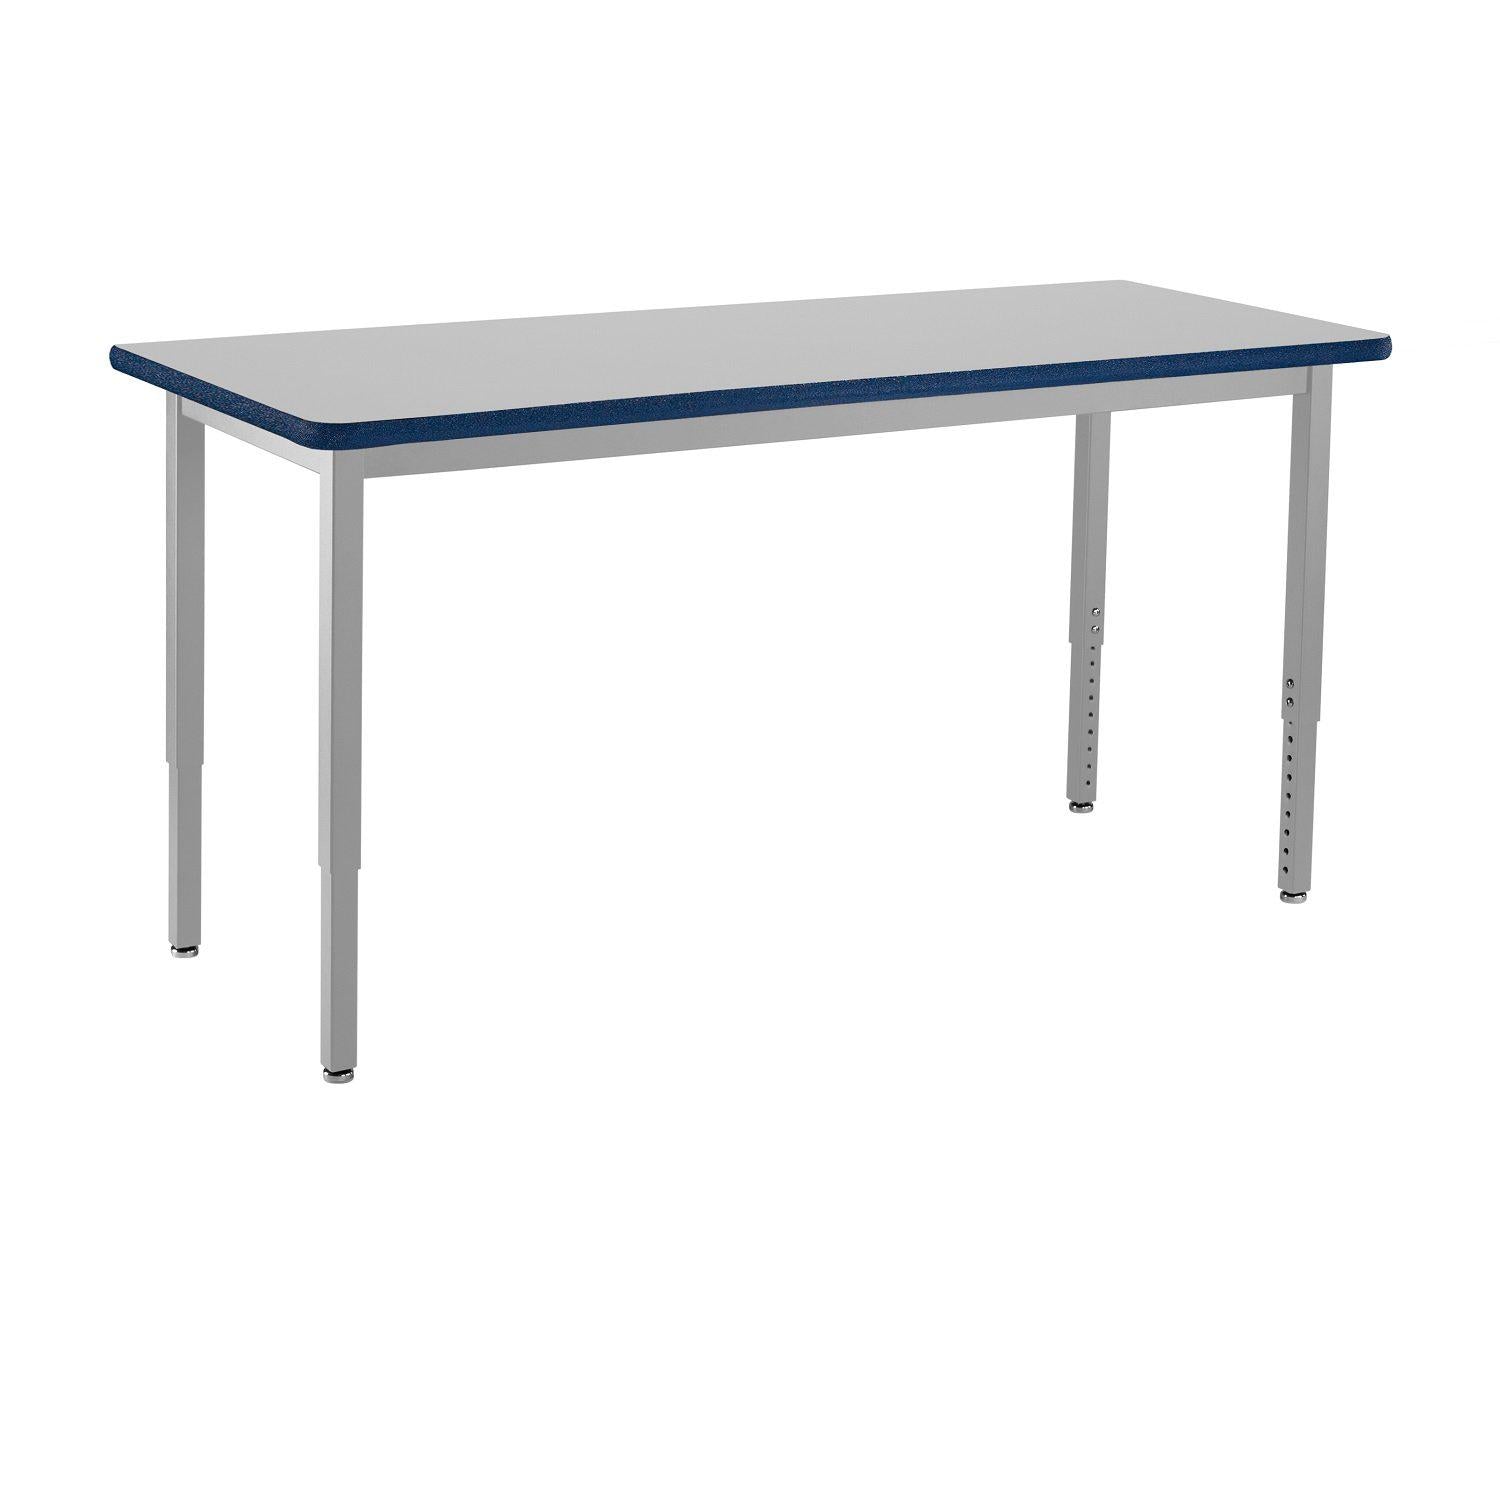 Heavy-Duty Height-Adjustable Utility Table, Soft Grey Frame, 30" x 48", Supreme High-Pressure Laminate Top with Black ProtectEdge